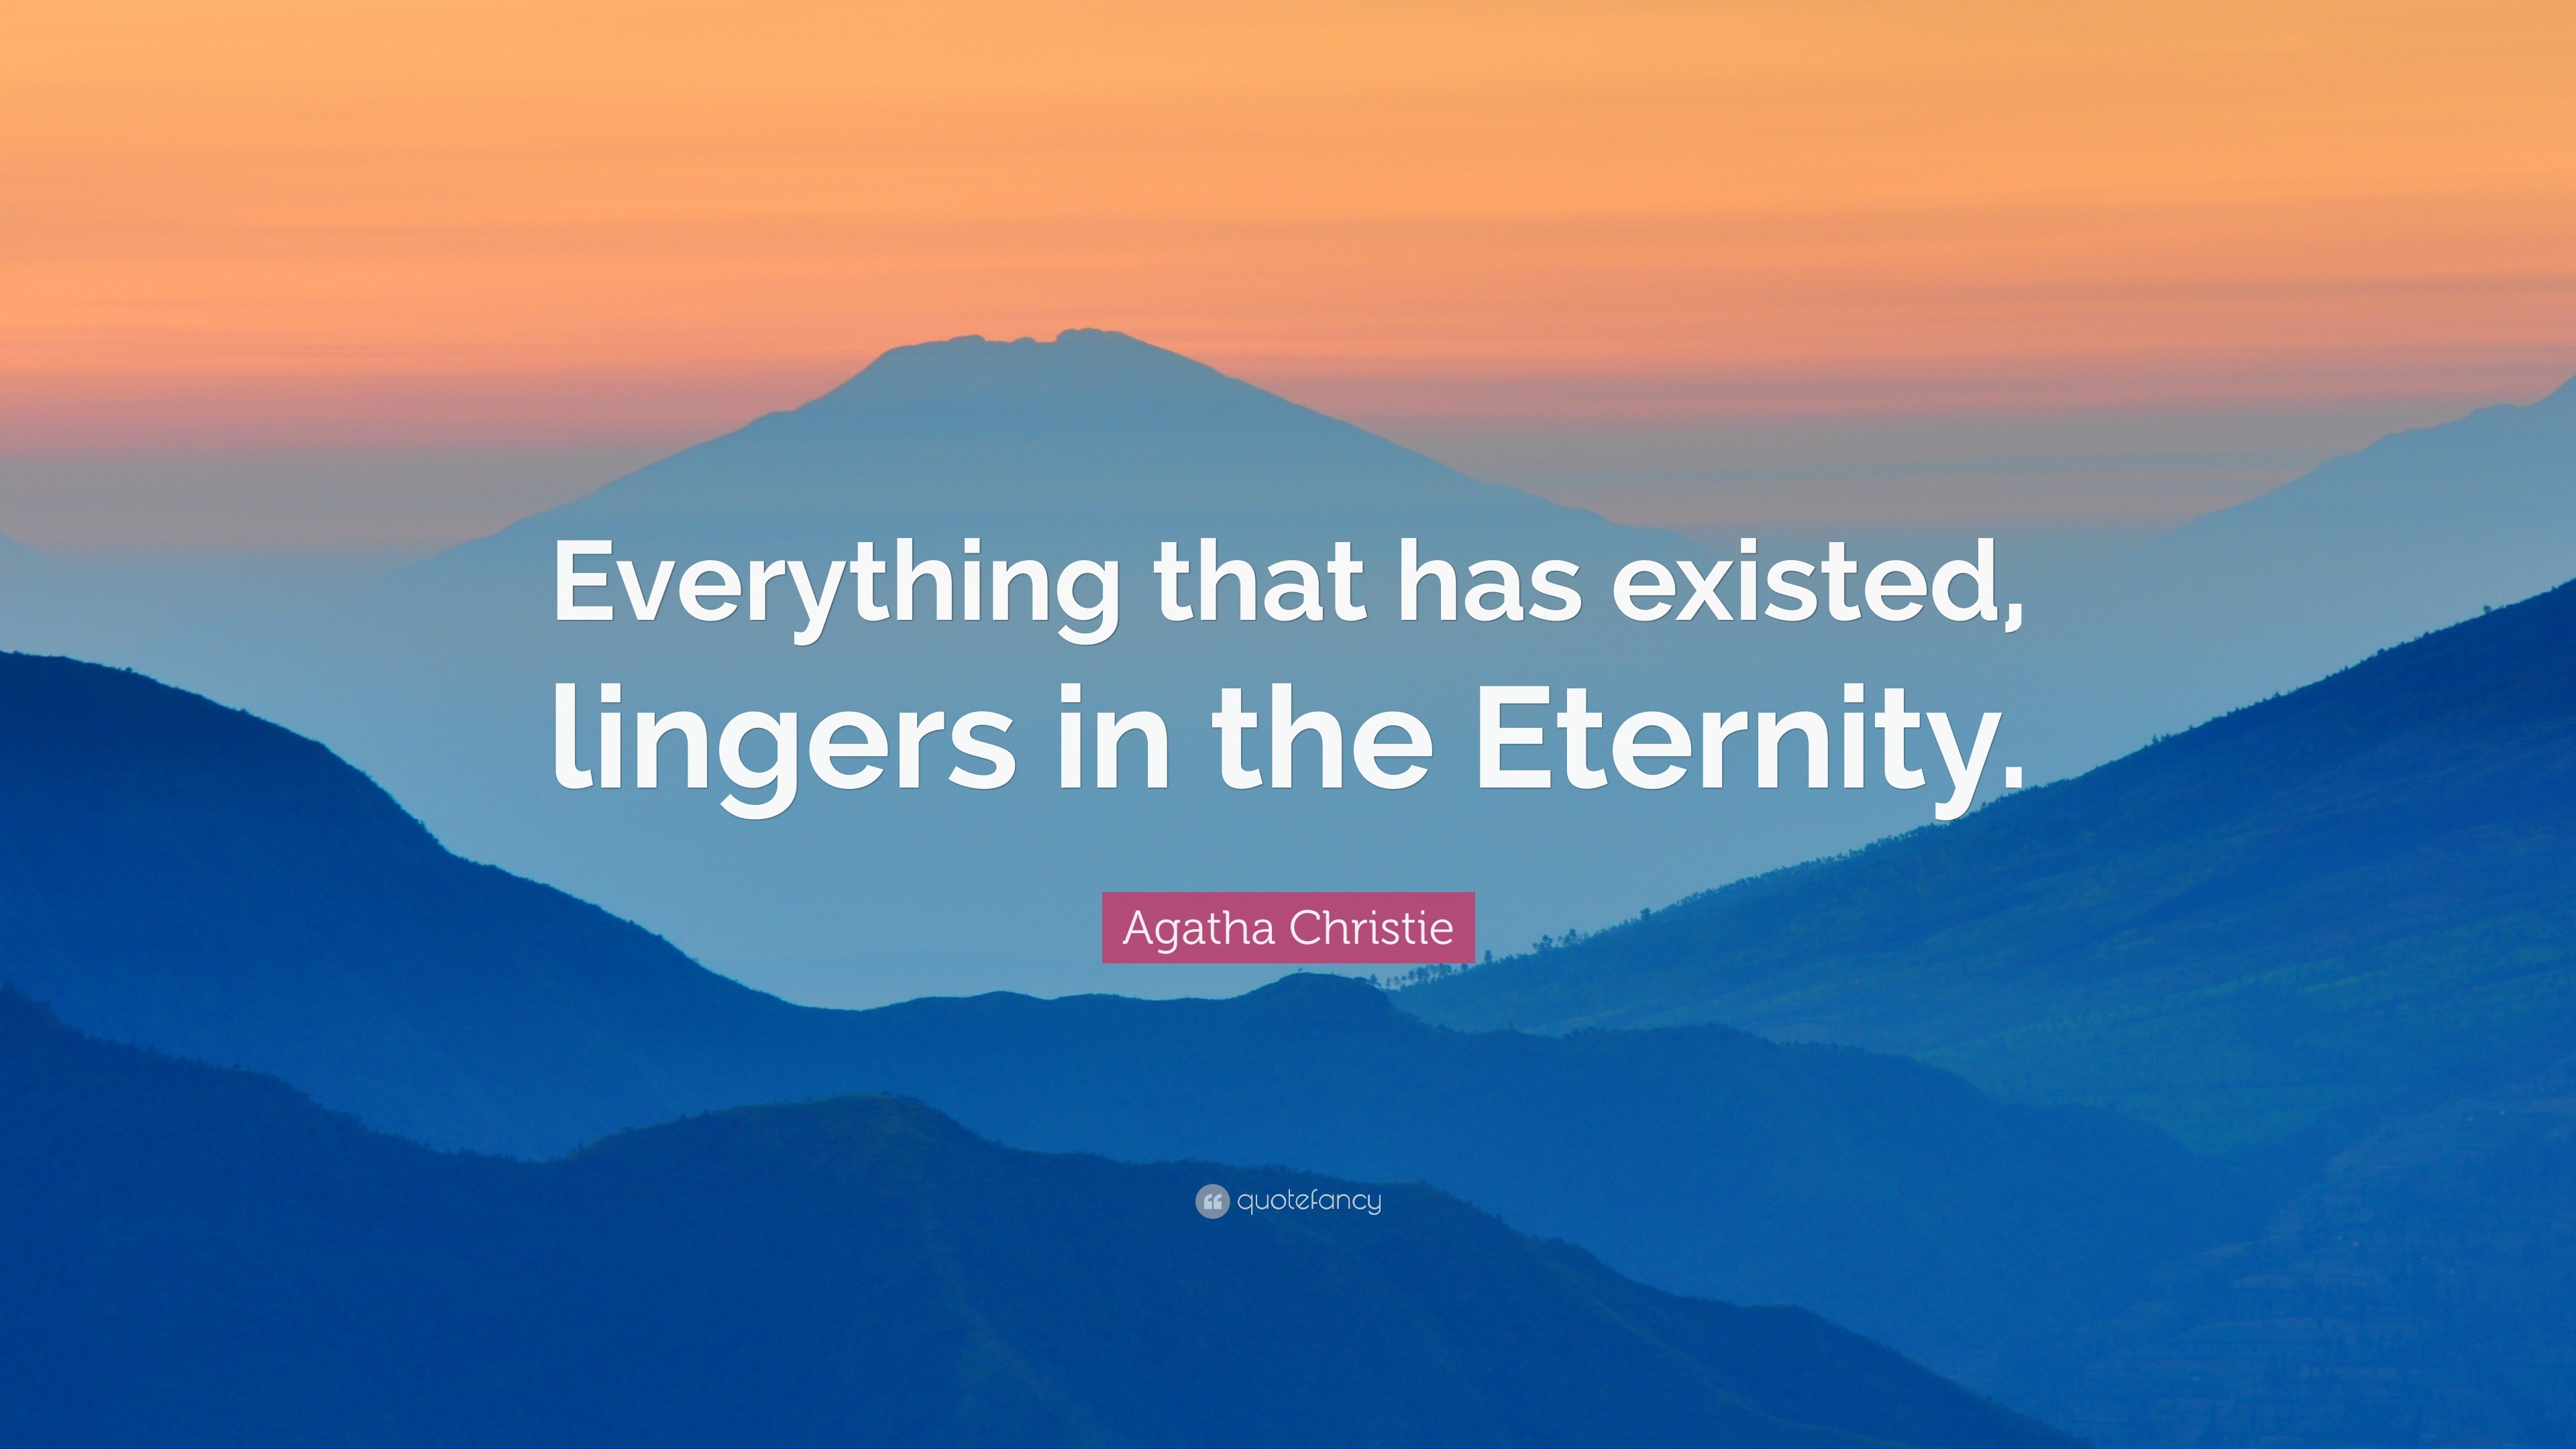 Agatha Christie Quote: “Everything that has existed, lingers in the  Eternity.”